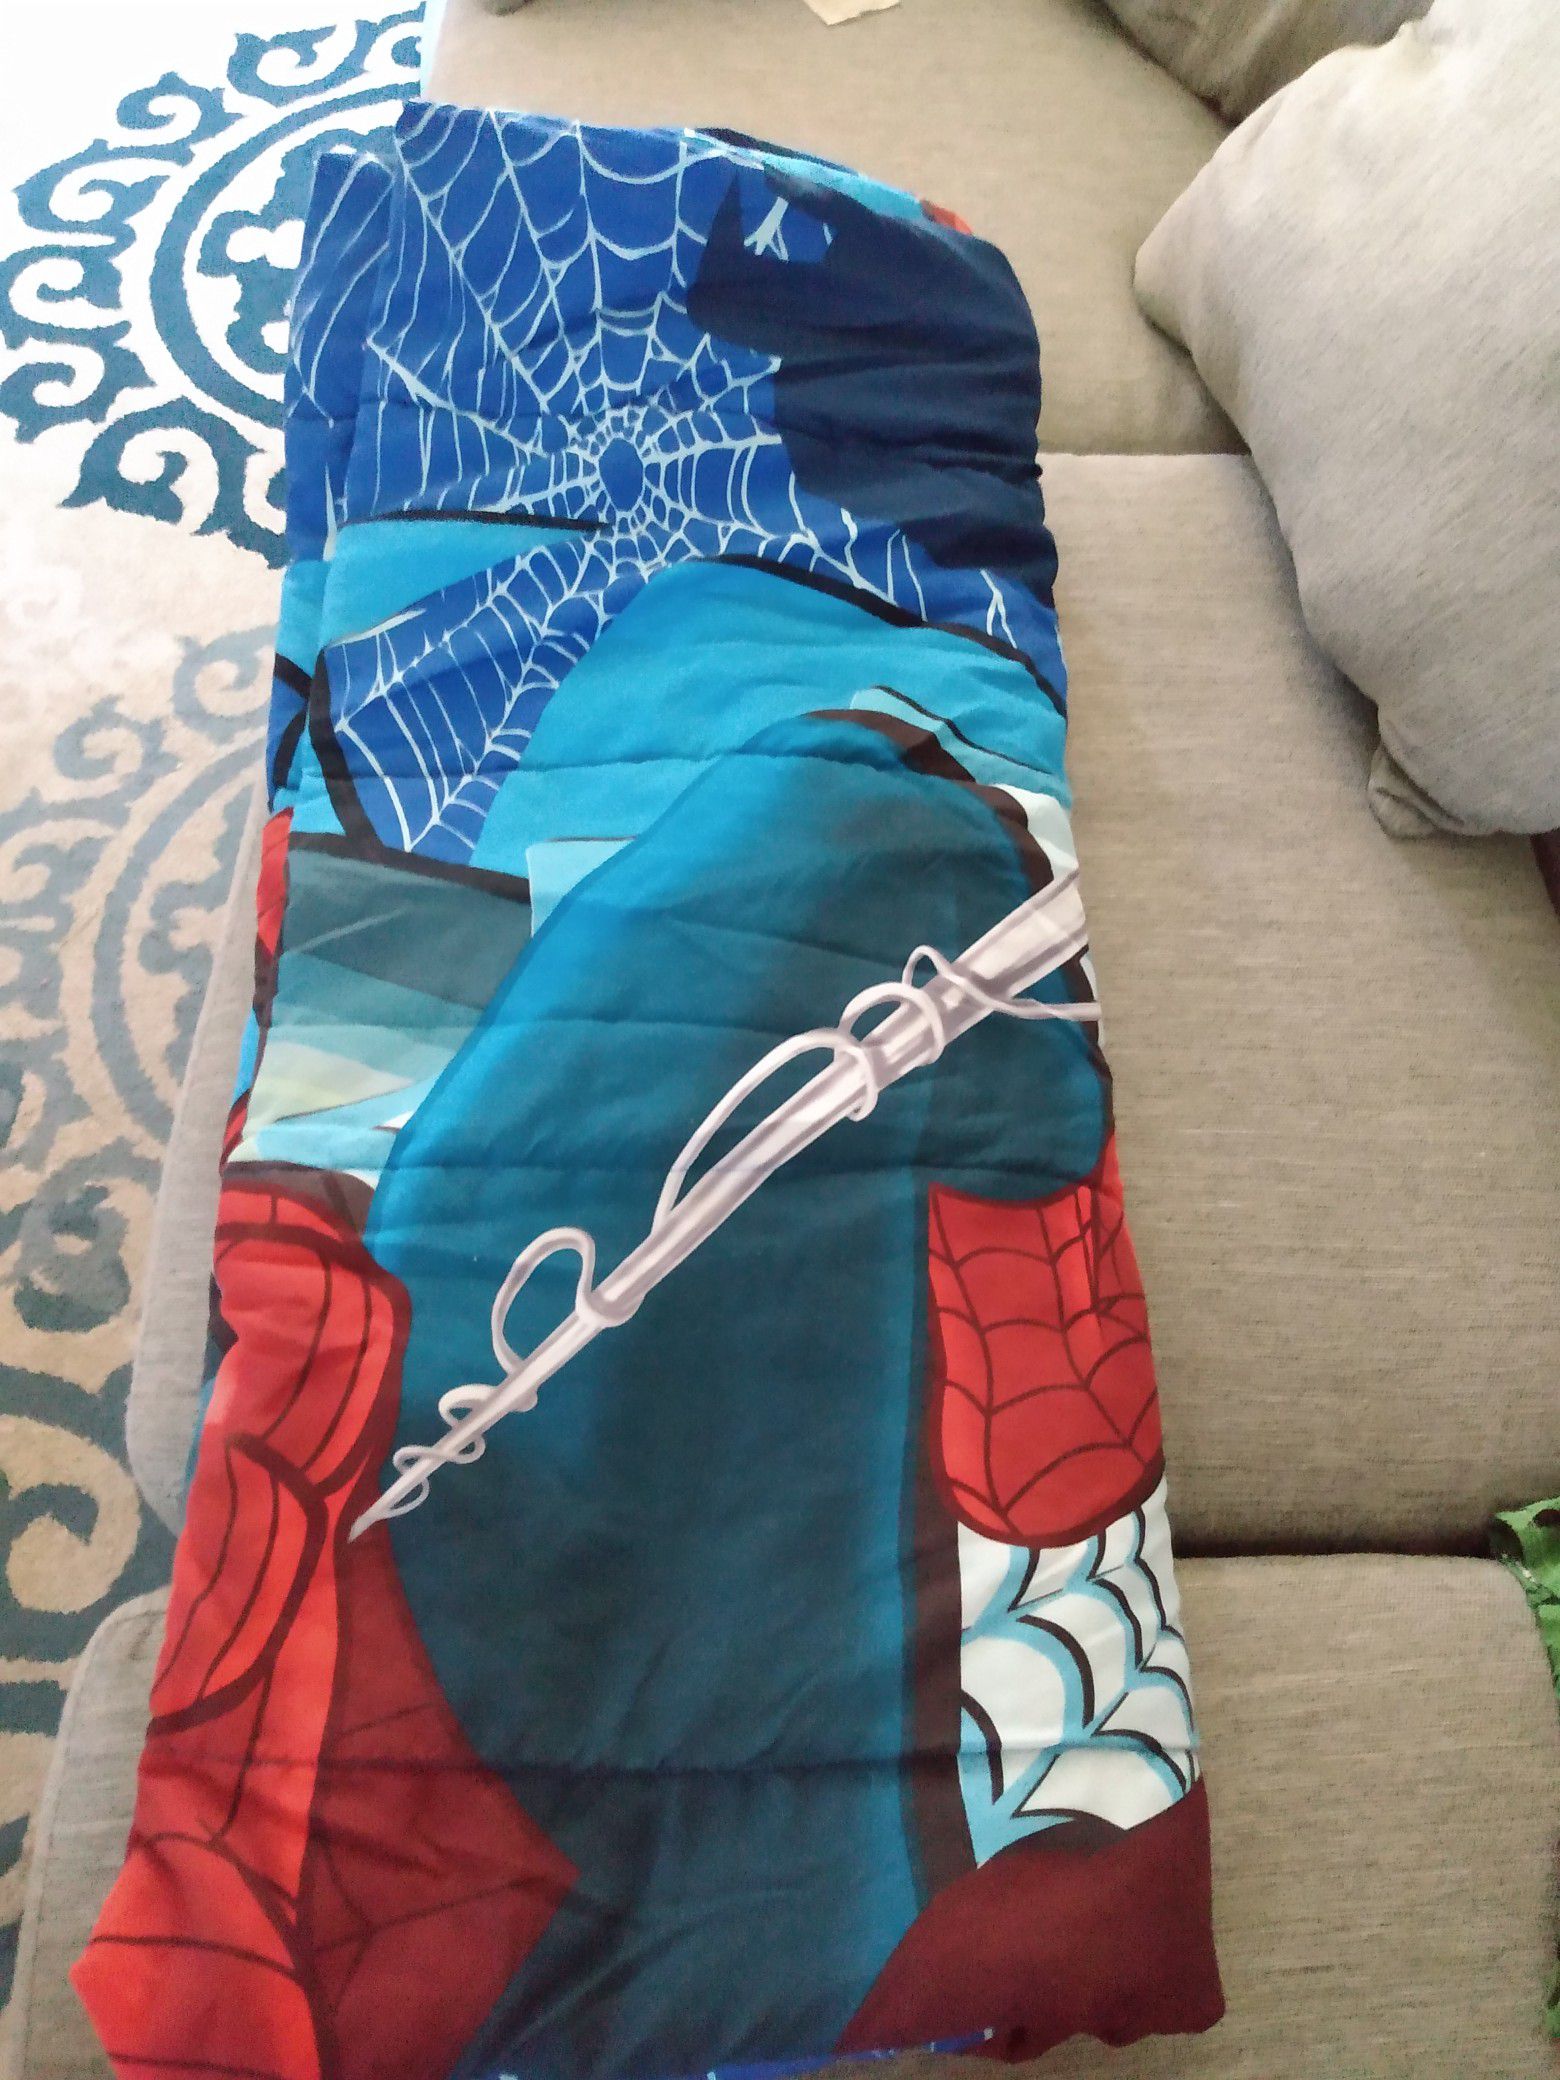 Spiderman twin set, bedspread, pillow, pillowcase, small pillow and pajamas. a total of 7 pieces.